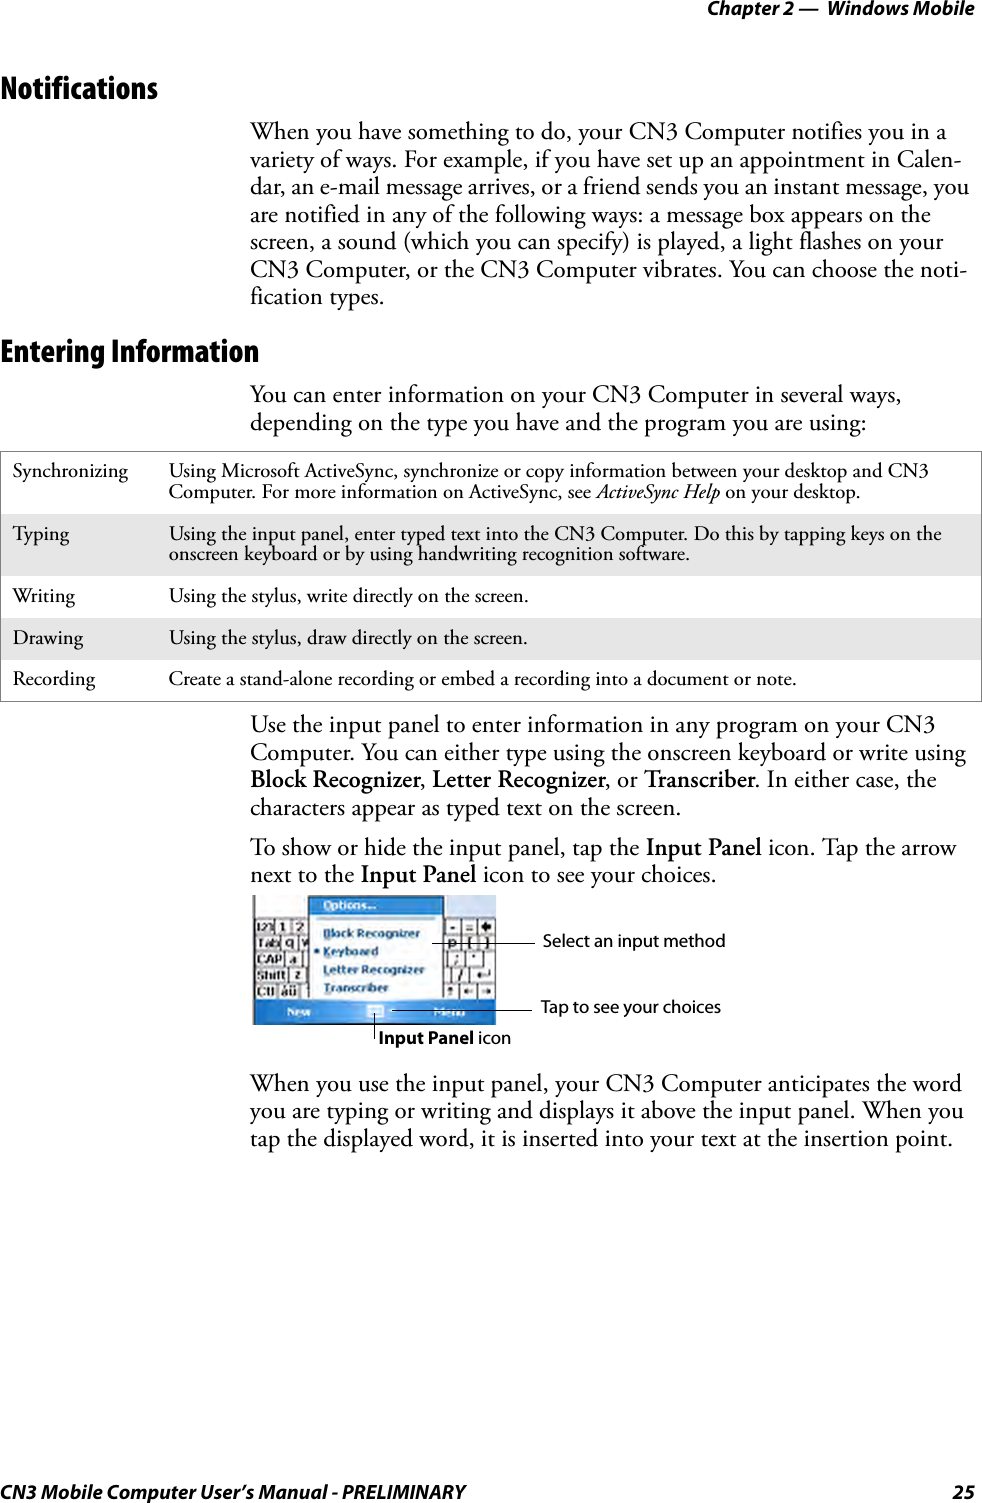 Chapter 2 —  Windows MobileCN3 Mobile Computer User’s Manual - PRELIMINARY 25NotificationsWhen you have something to do, your CN3 Computer notifies you in a variety of ways. For example, if you have set up an appointment in Calen-dar, an e-mail message arrives, or a friend sends you an instant message, you are notified in any of the following ways: a message box appears on the screen, a sound (which you can specify) is played, a light flashes on your CN3 Computer, or the CN3 Computer vibrates. You can choose the noti-fication types.Entering InformationYou can enter information on your CN3 Computer in several ways, depending on the type you have and the program you are using:Use the input panel to enter information in any program on your CN3 Computer. You can either type using the onscreen keyboard or write using Block Recognizer, Letter Recognizer, or Transcriber. In either case, the characters appear as typed text on the screen.To show or hide the input panel, tap the Input Panel icon. Tap the arrow next to the Input Panel icon to see your choices.When you use the input panel, your CN3 Computer anticipates the word you are typing or writing and displays it above the input panel. When you tap the displayed word, it is inserted into your text at the insertion point. Synchronizing Using Microsoft ActiveSync, synchronize or copy information between your desktop and CN3 Computer. For more information on ActiveSync, see ActiveSync Help on your desktop.Typi n g Using the input panel, enter typed text into the CN3 Computer. Do this by tapping keys on the onscreen keyboard or by using handwriting recognition software.Writing Using the stylus, write directly on the screen.Drawing Using the stylus, draw directly on the screen.Recording Create a stand-alone recording or embed a recording into a document or note.Select an input methodTap to see your choicesInput Panel icon